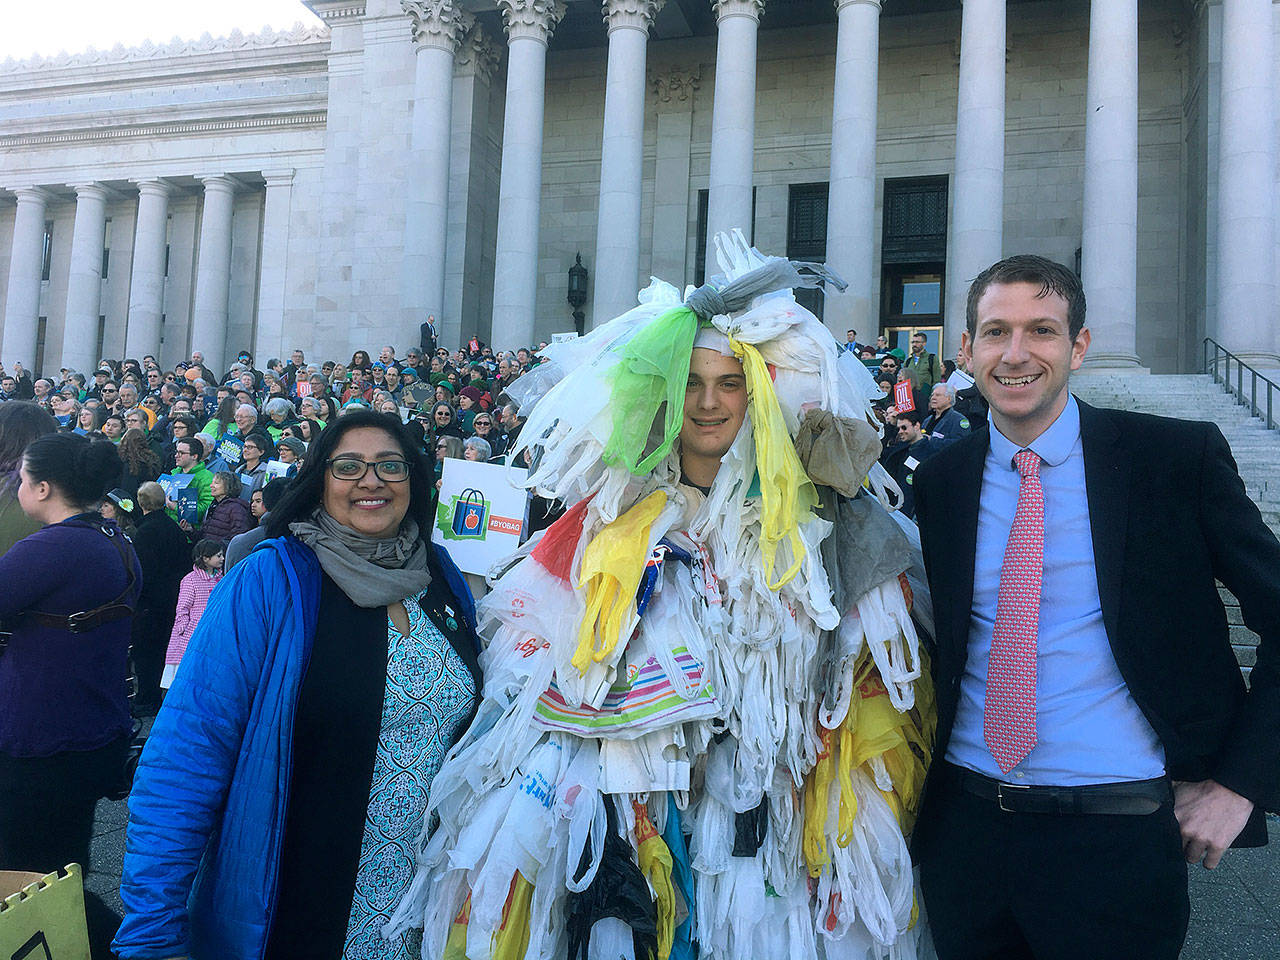 Sen. Mona Das and Rep. Joe Fitzgibbon with the “Bag Monster” on the steps of the Capitol Building in Olympia. COURTESY PHOTO